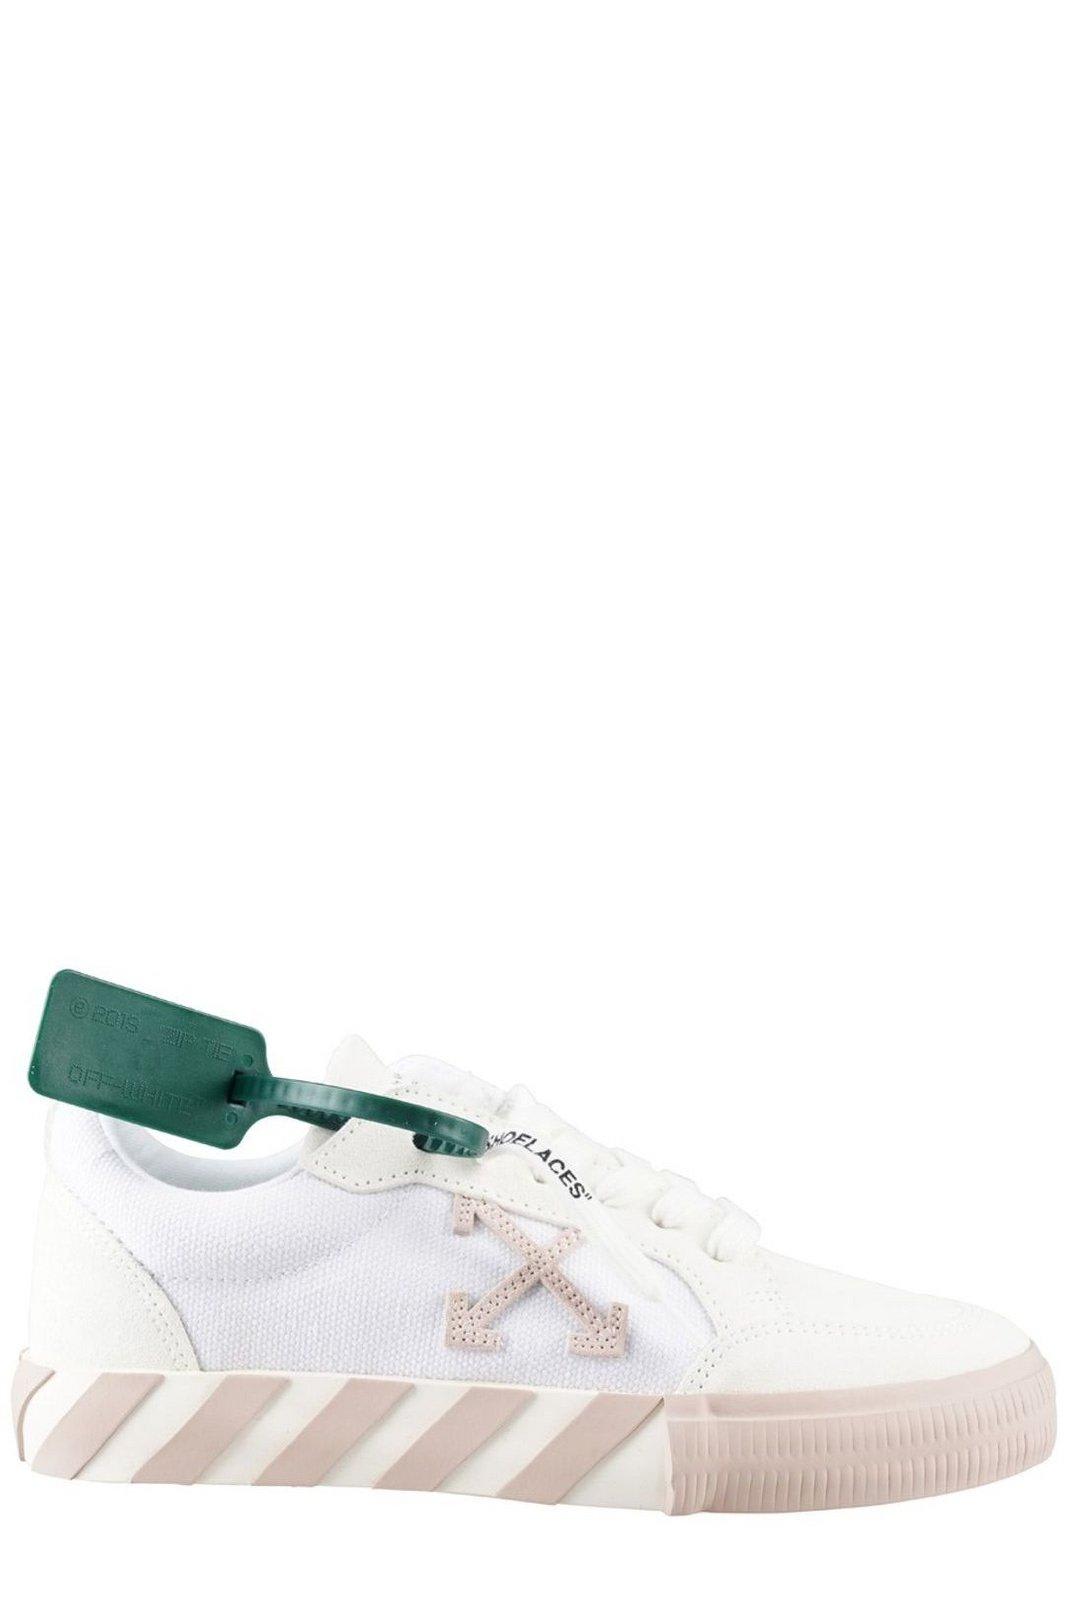 Off-White Arrows Patch Low-top Sneakers